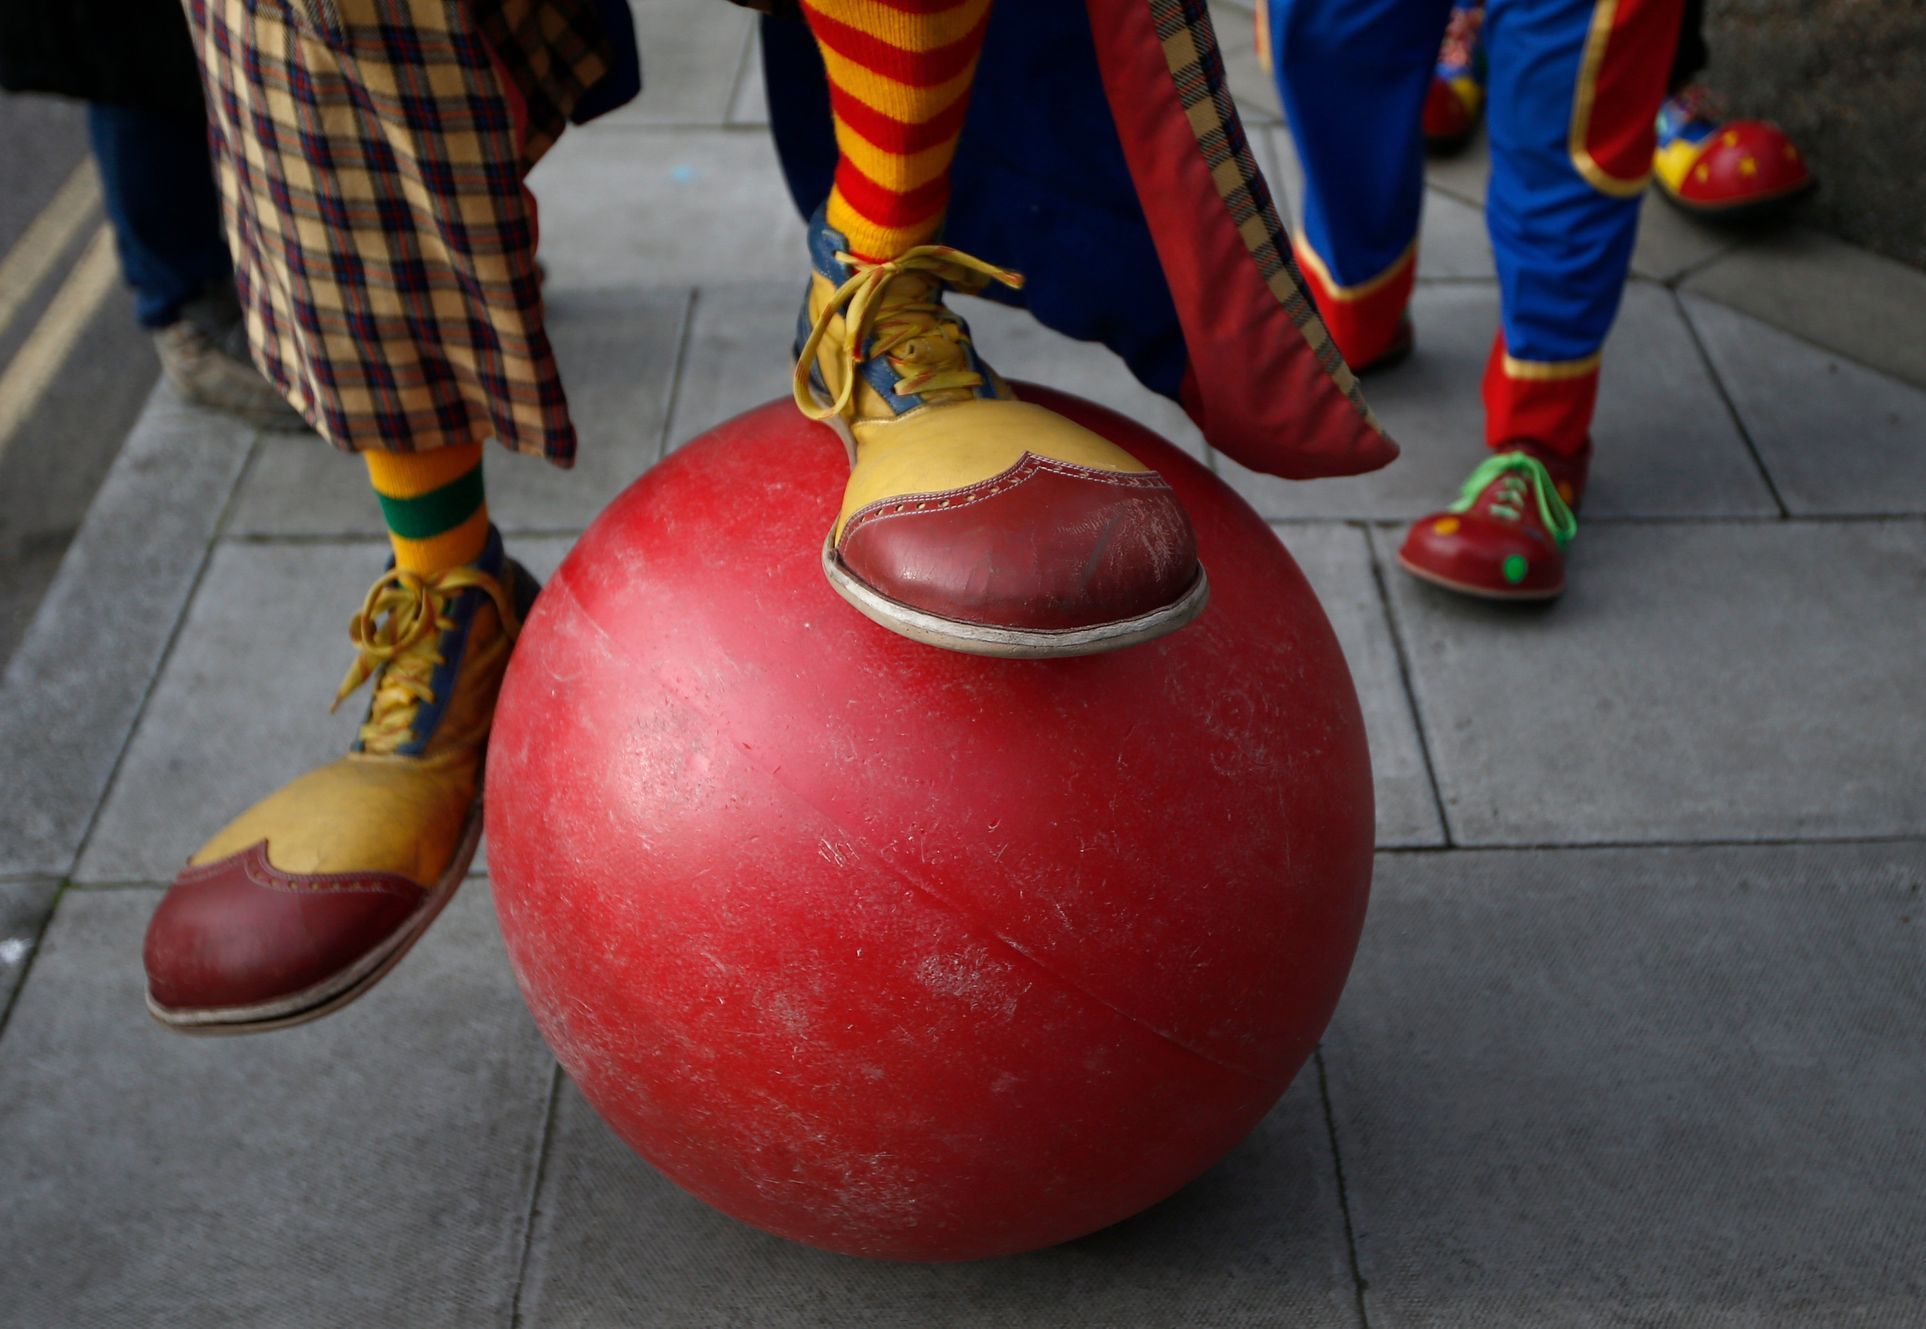 A clown attempts to balance on a large ball outside the All Saints Church before the Grimaldi clown service in Dalston, north London